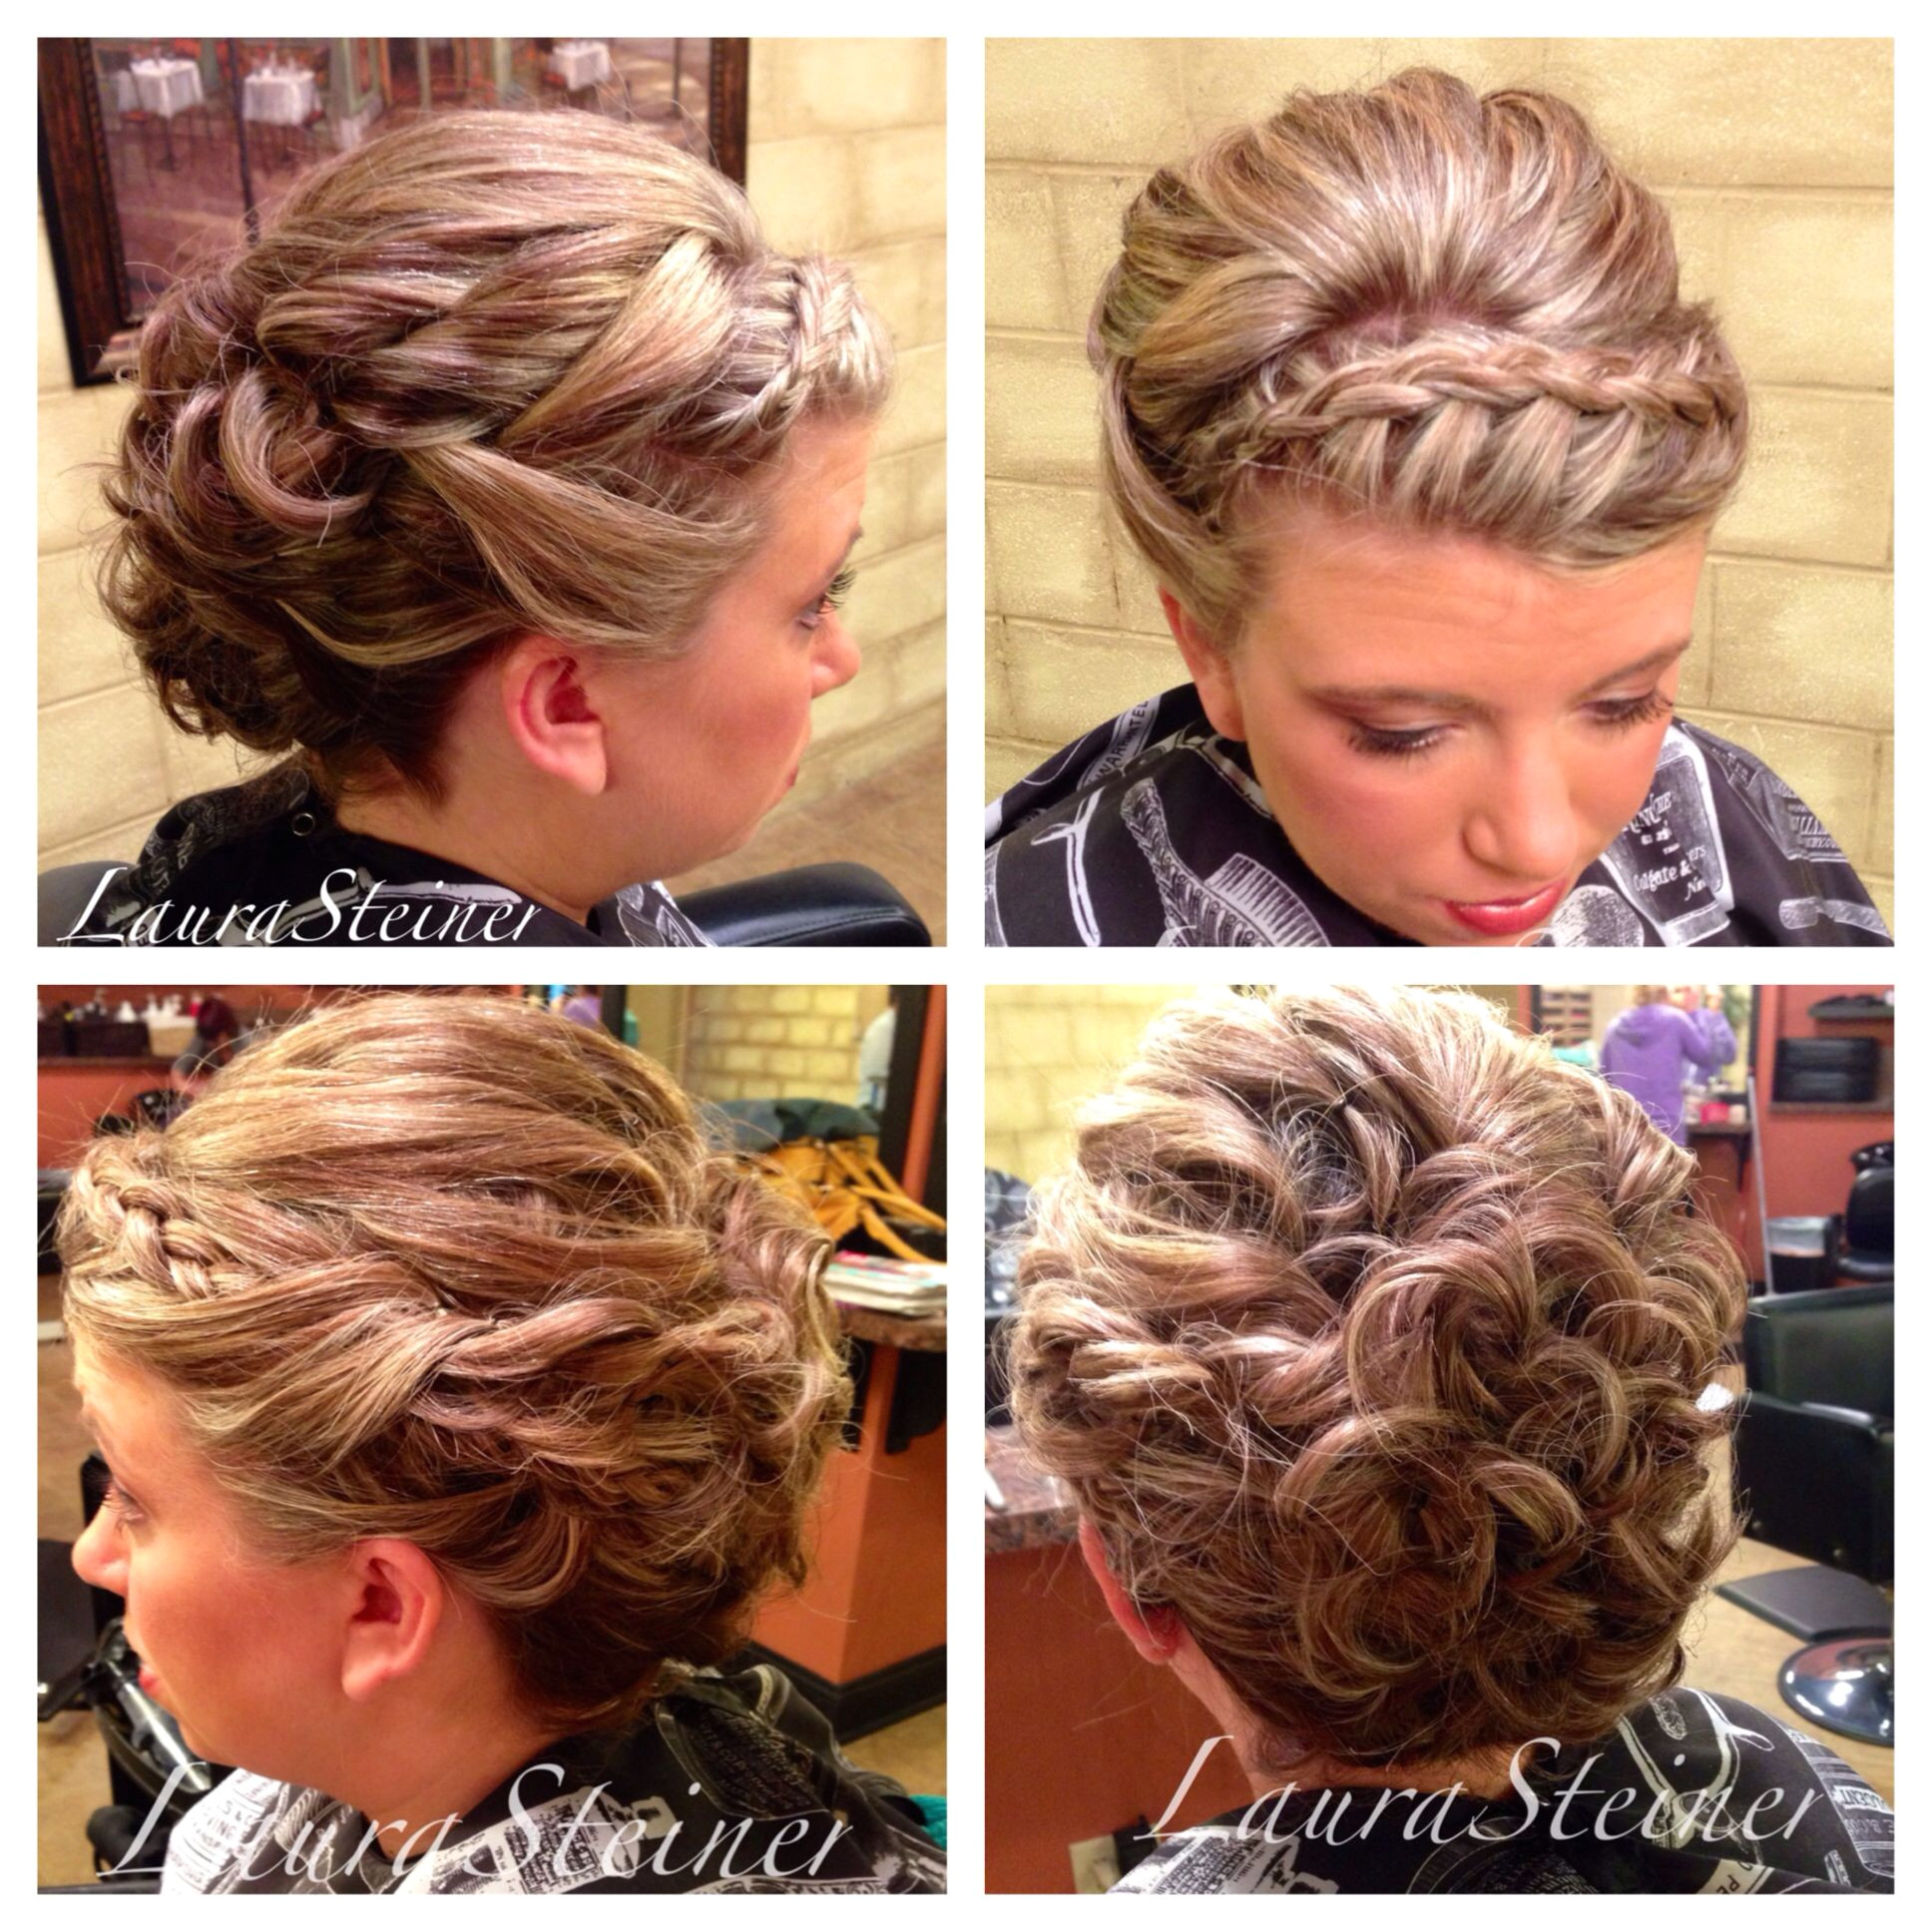 Wedding updo with headband style braid volume at the crown and curls Another client with hair above the shoulders styled to help the hair appear longer